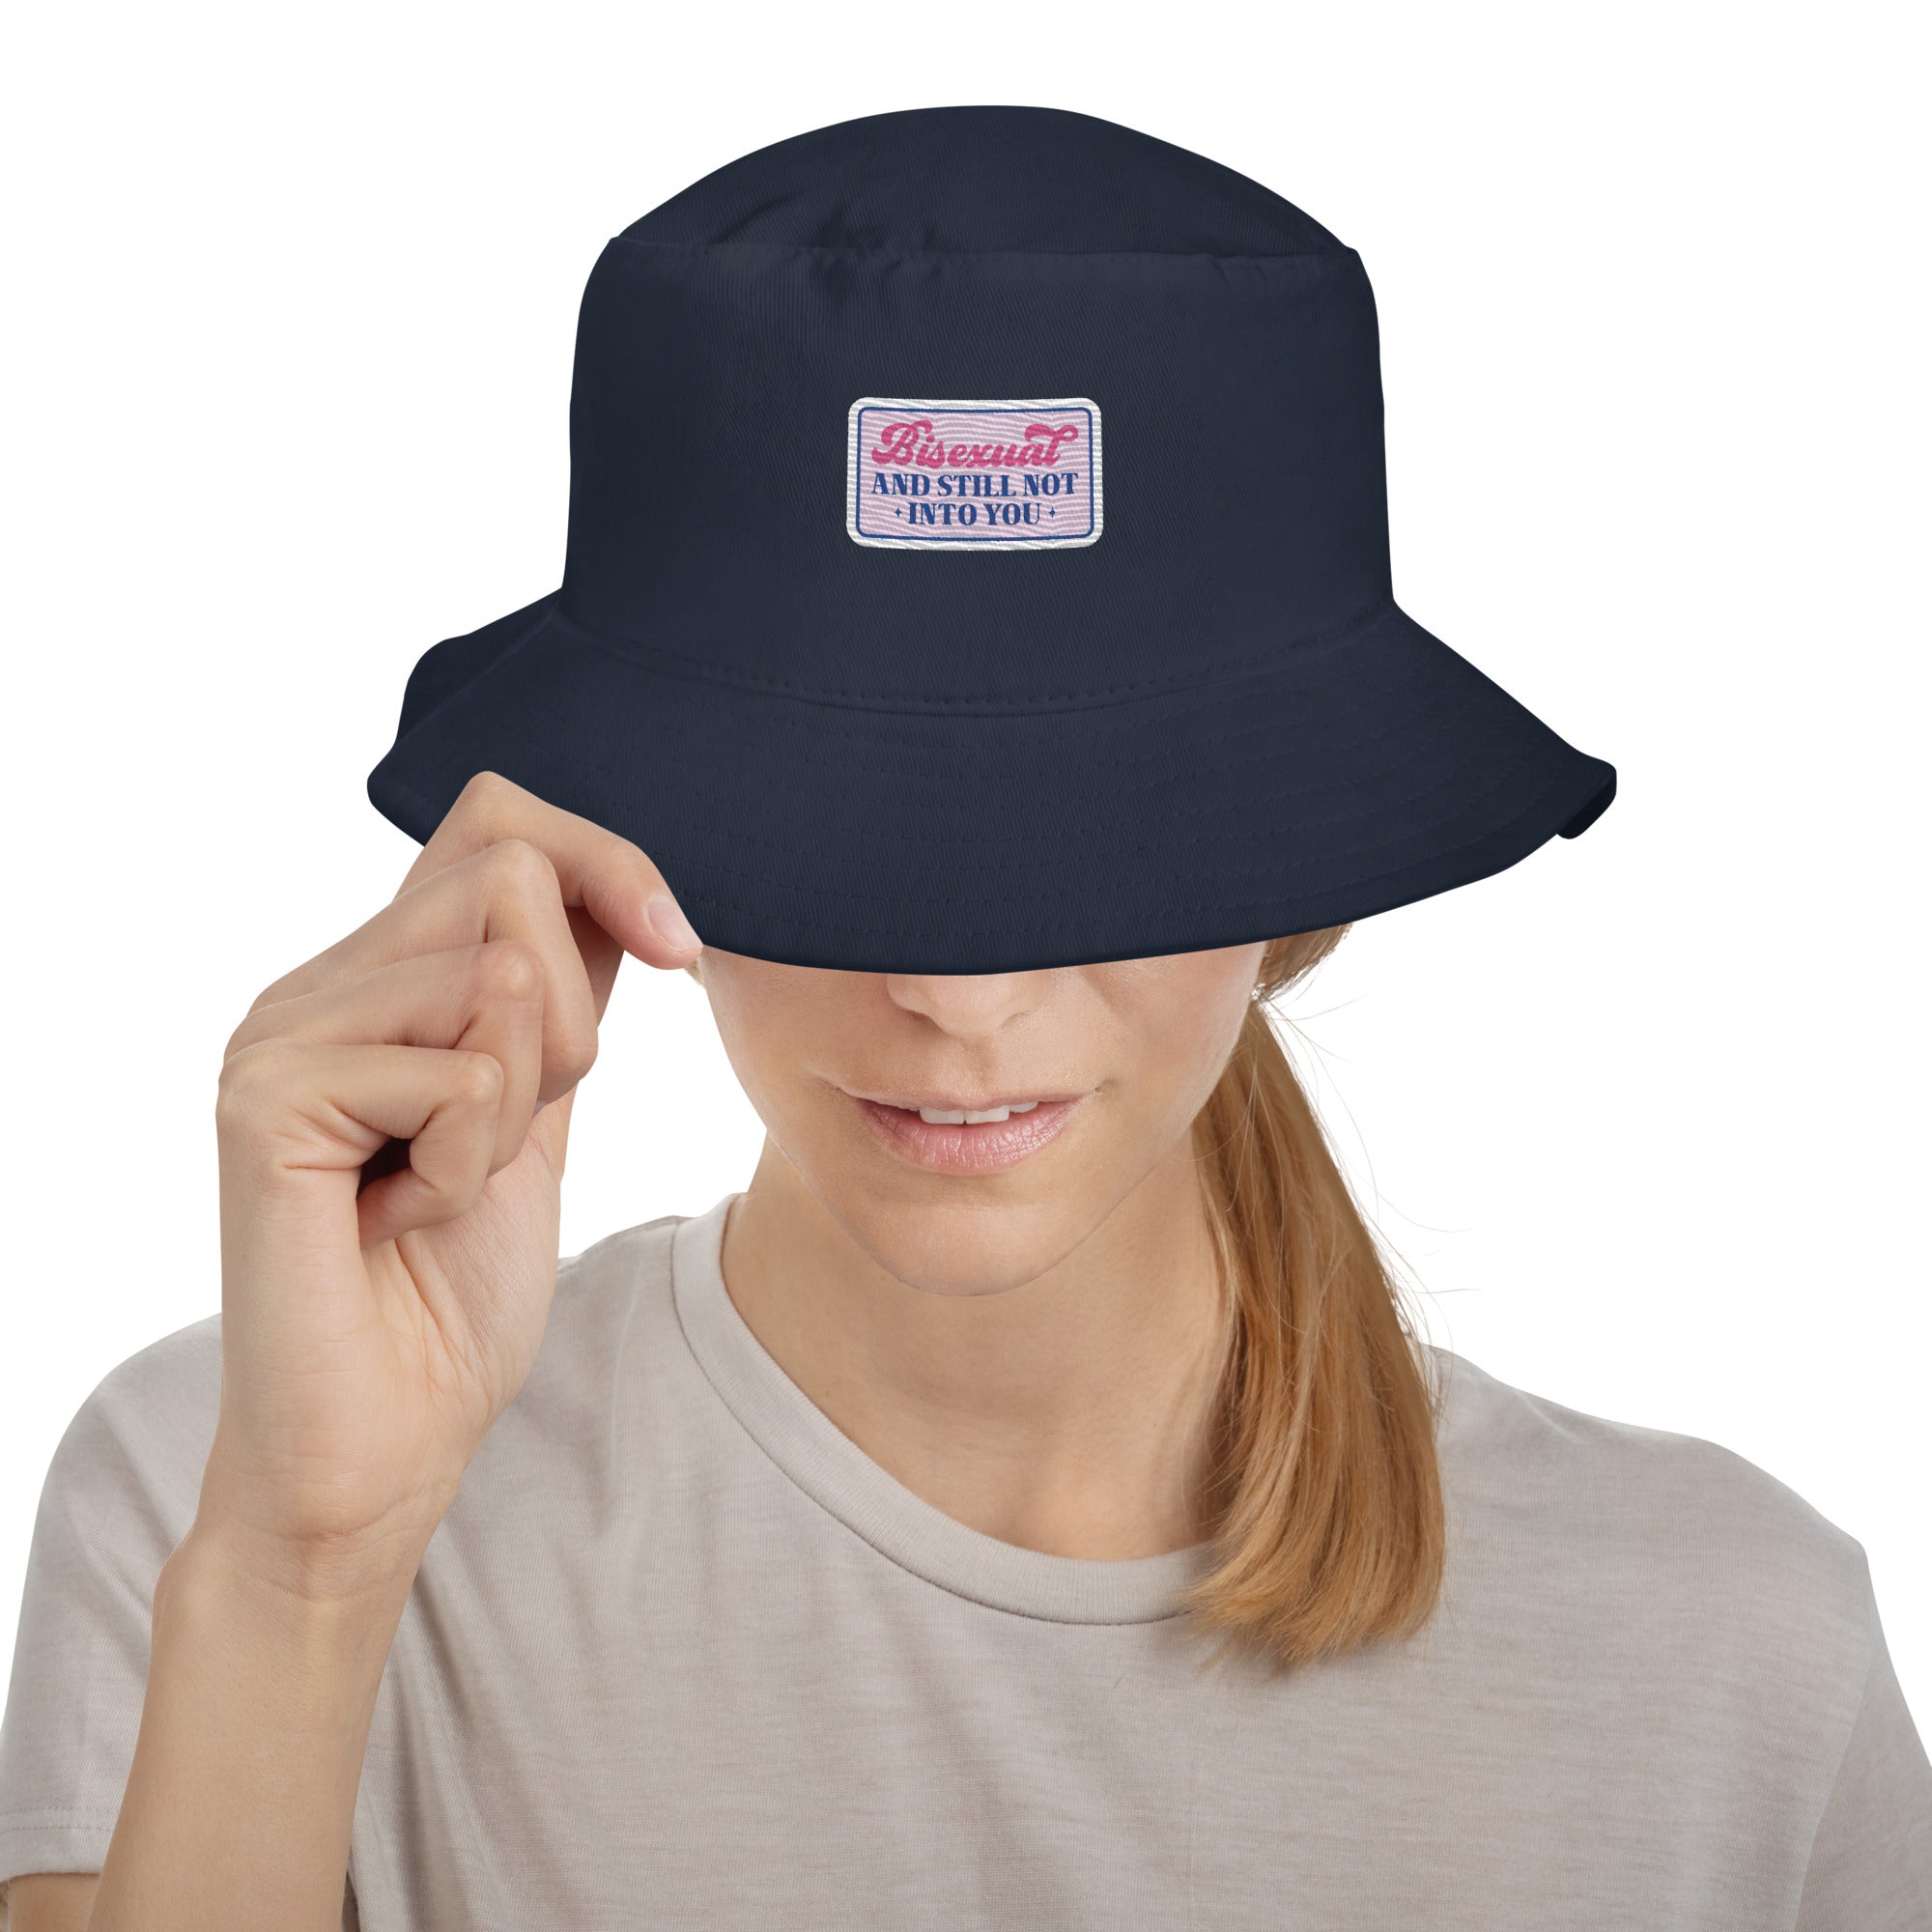 Bisexual AND STILL NOT INTO YOU Premium Embriodered Bucket Hat